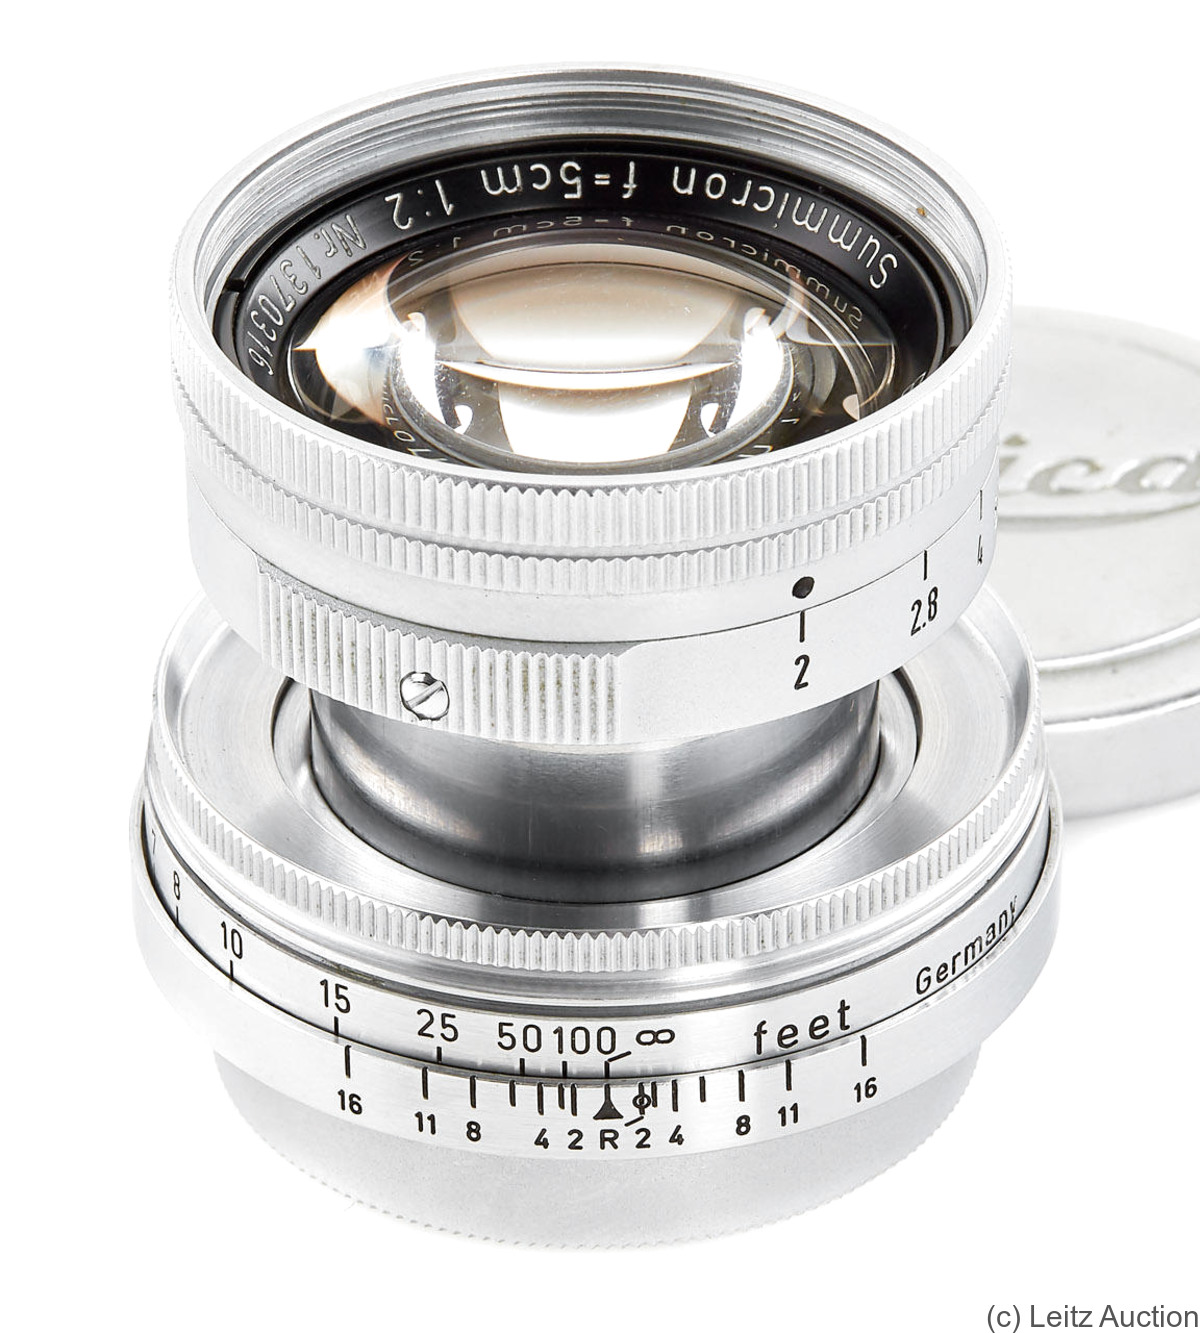 Leitz: 50mm (5cm) f2 Summicron (SM, collapsible) camera